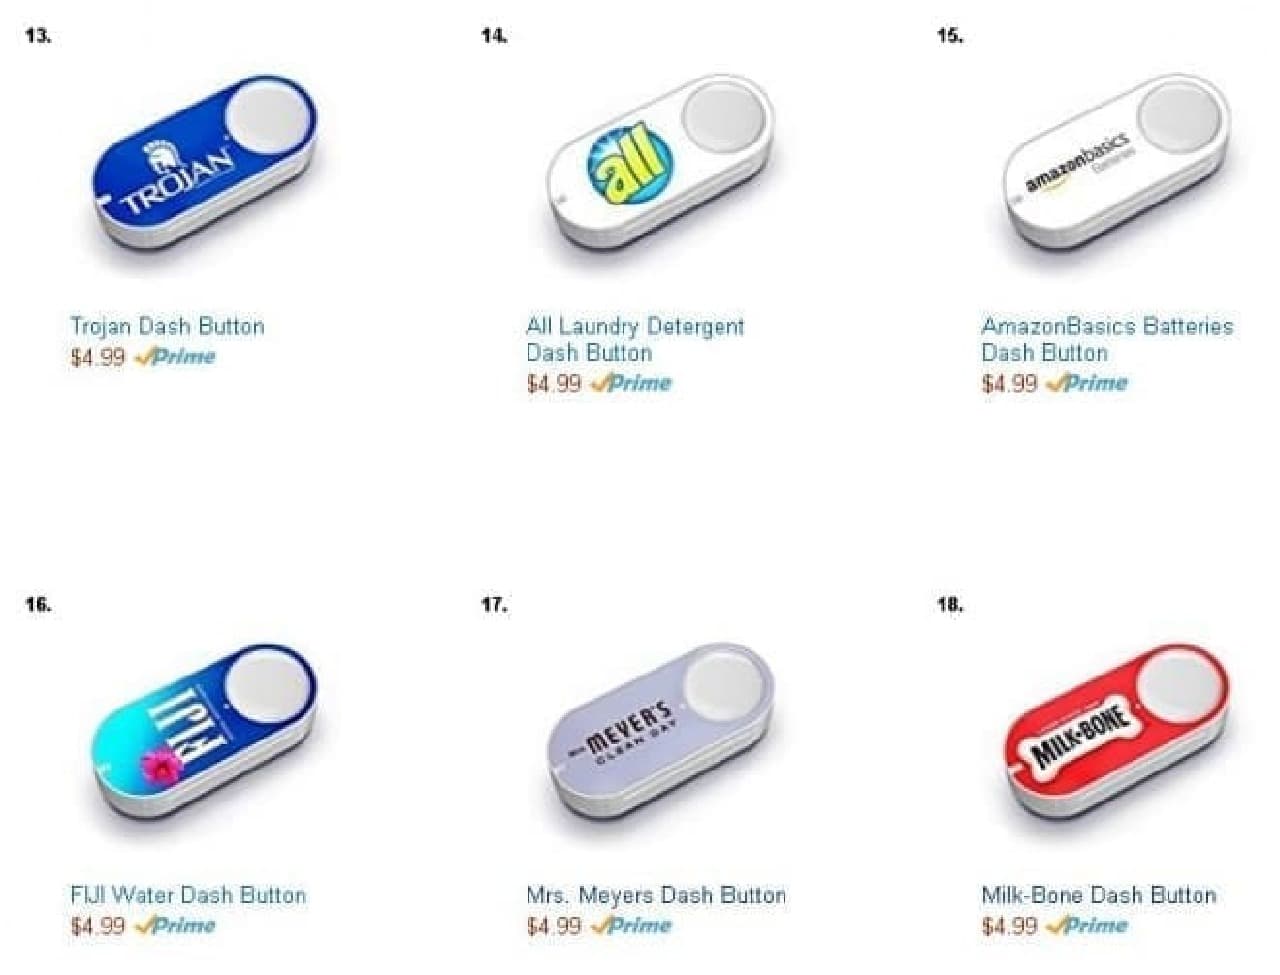 "Amazon Dash Button" now on sale in Japan